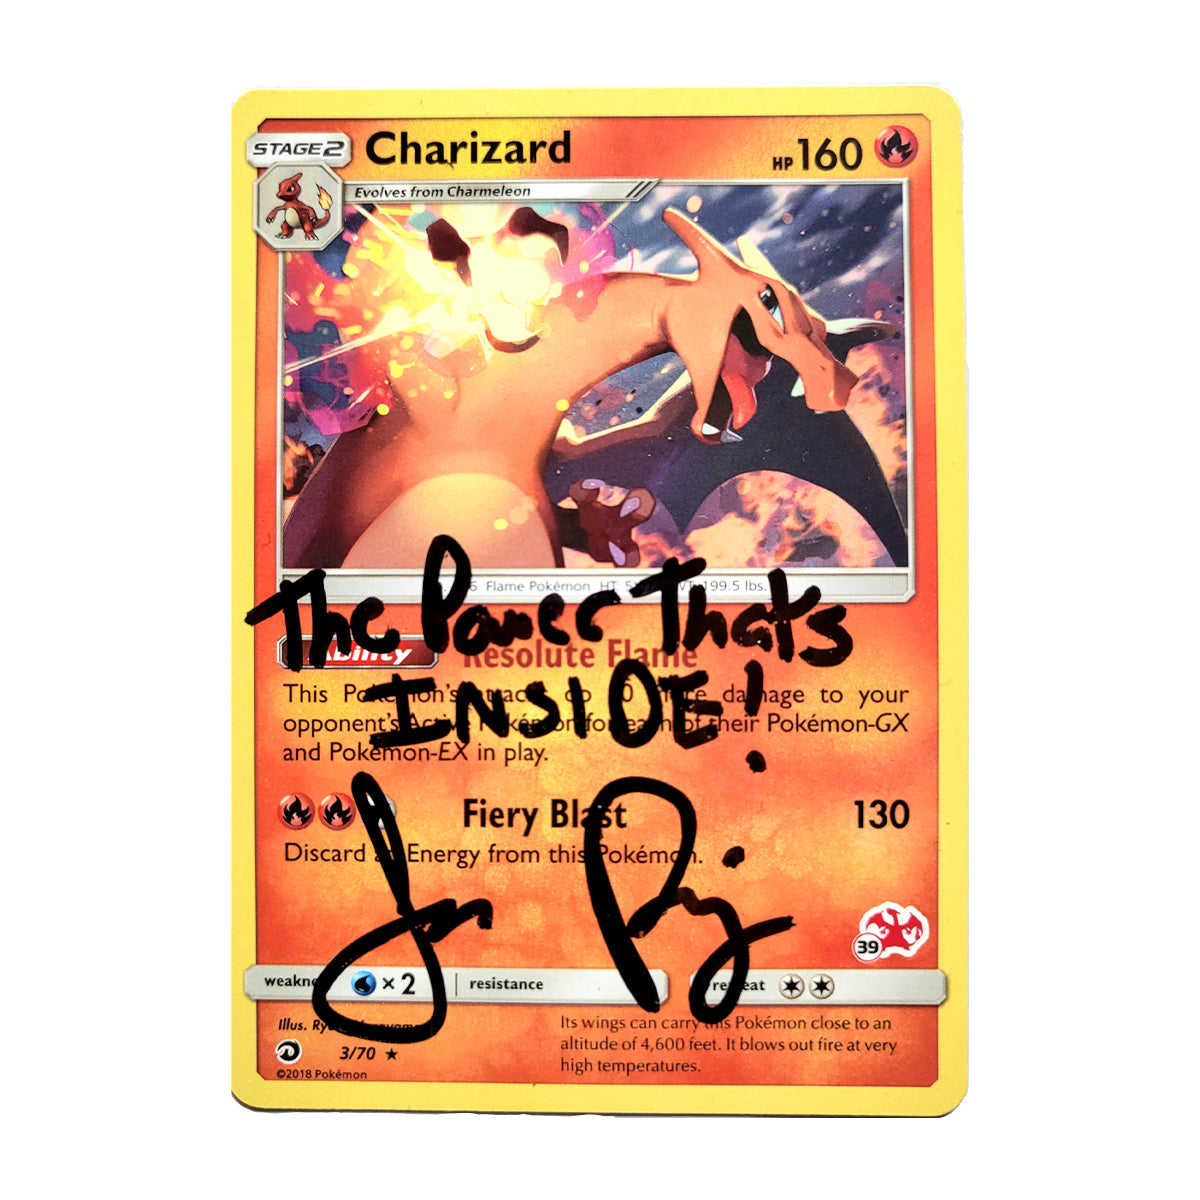 A Autographed Charizard Card - Mint Condition - Limited Supply